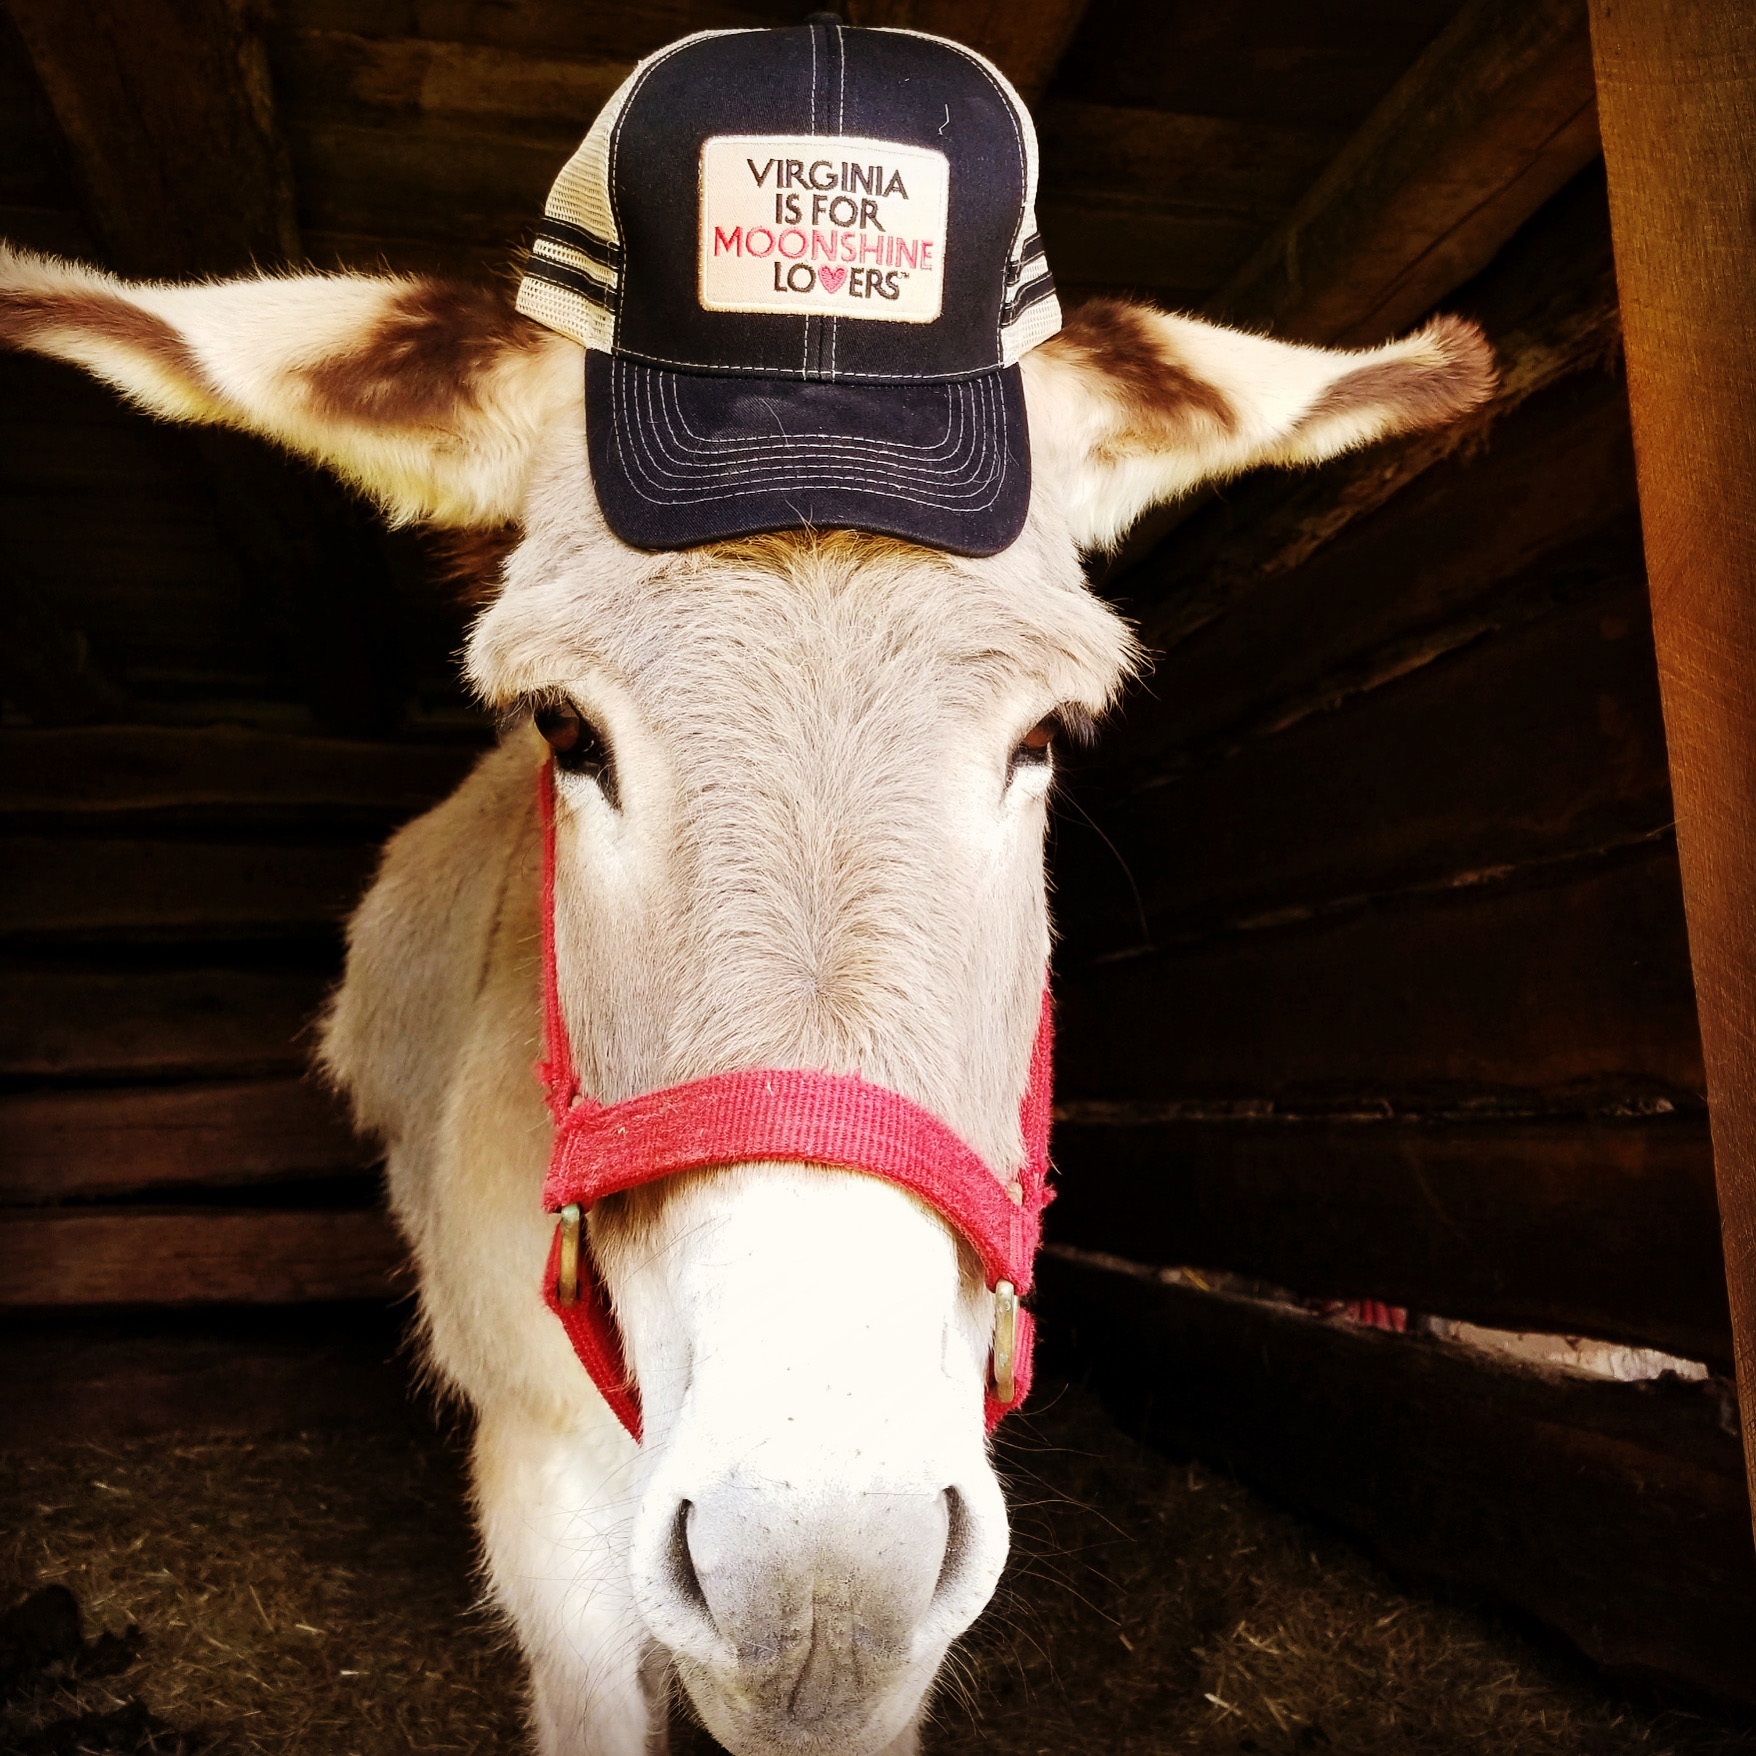 A mule wearing a baseball cap that says "Virginia is for Moonshine Lovers"